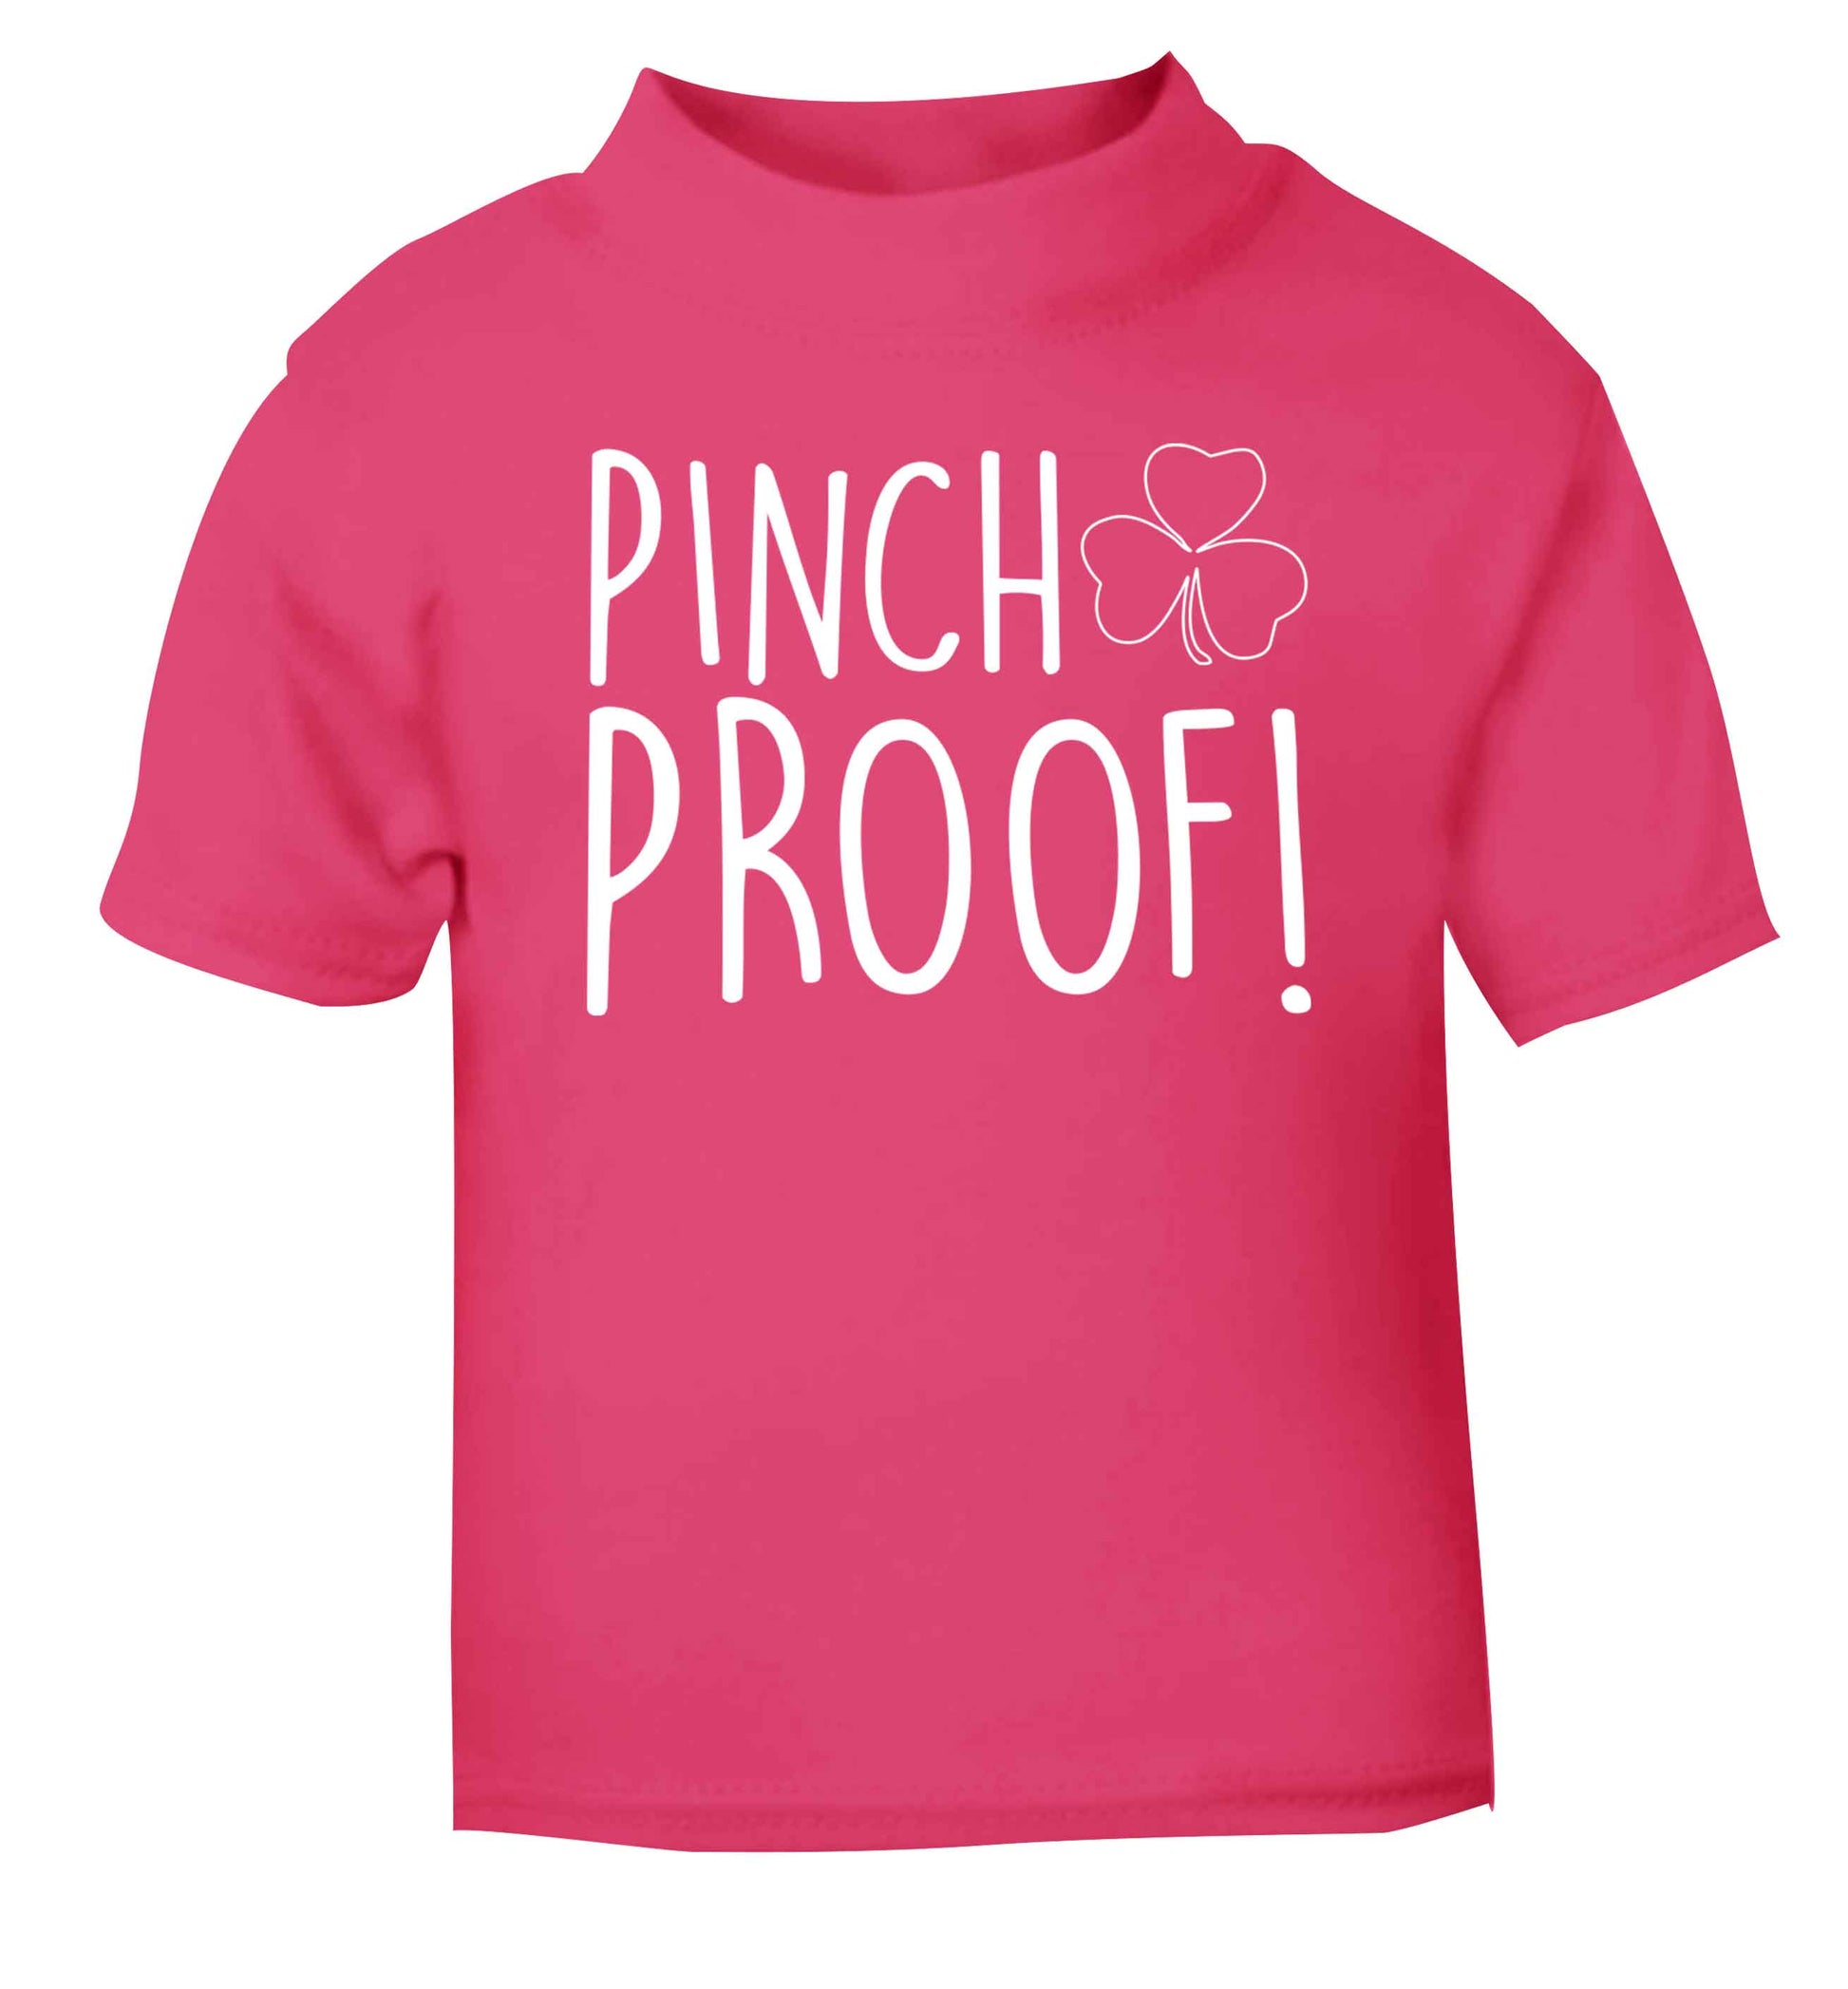 Pinch Proof pink baby toddler Tshirt 2 Years